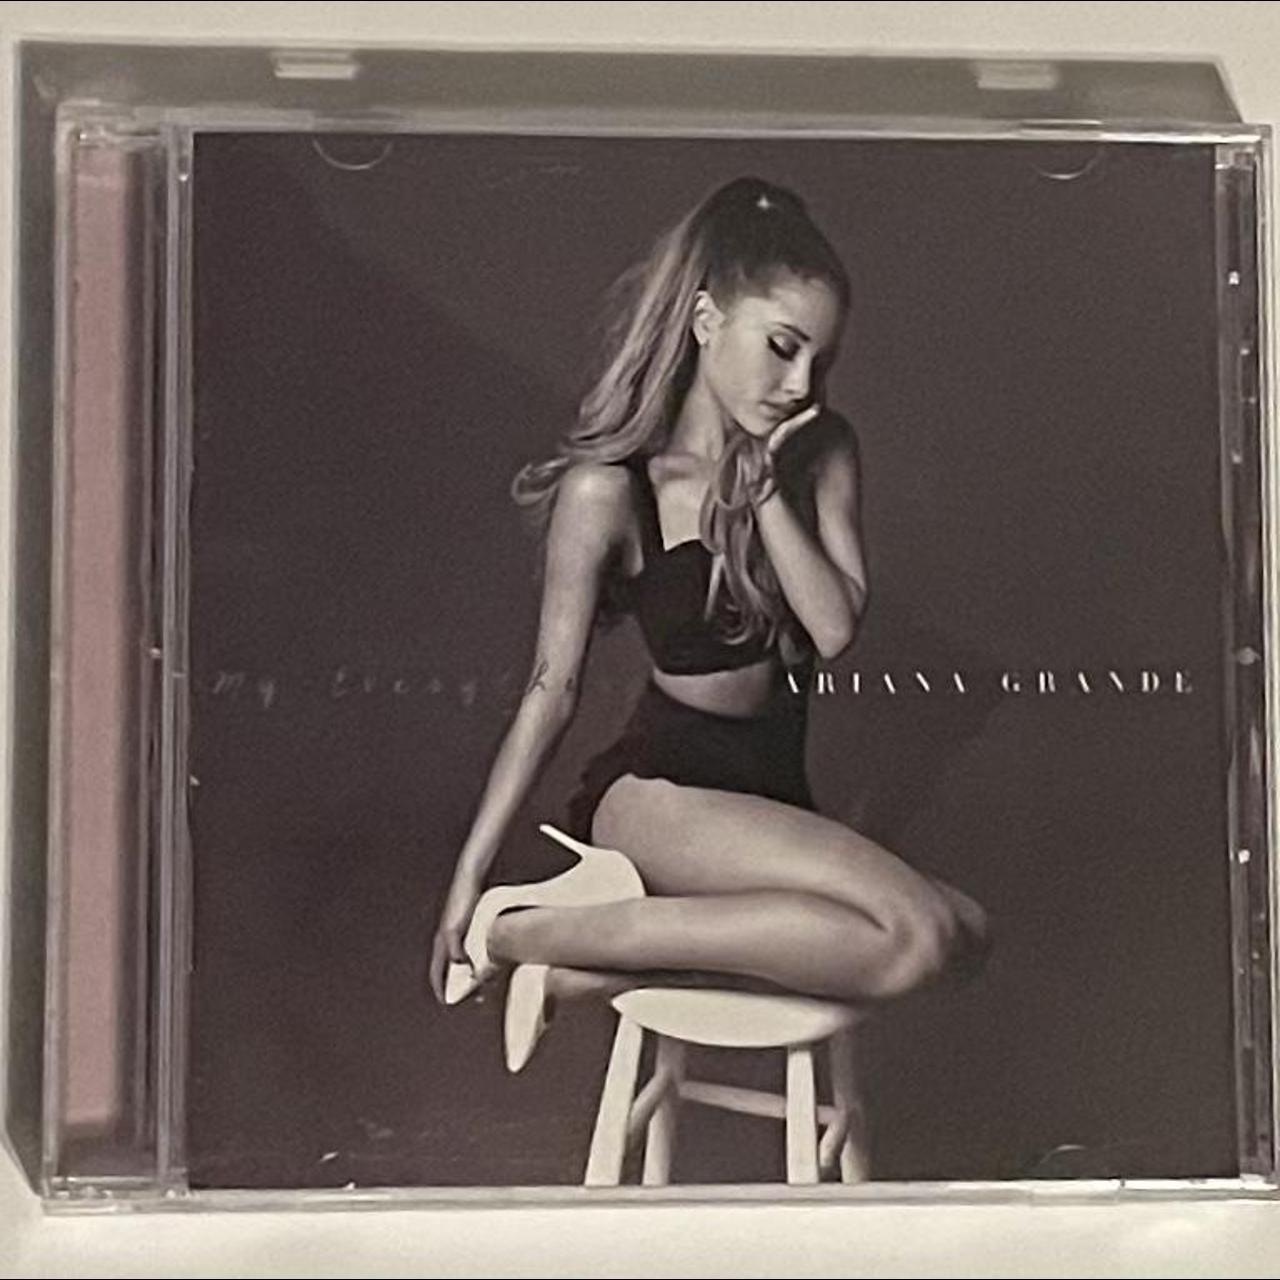 Ariana Grande ~ My Everything cd, everything in good